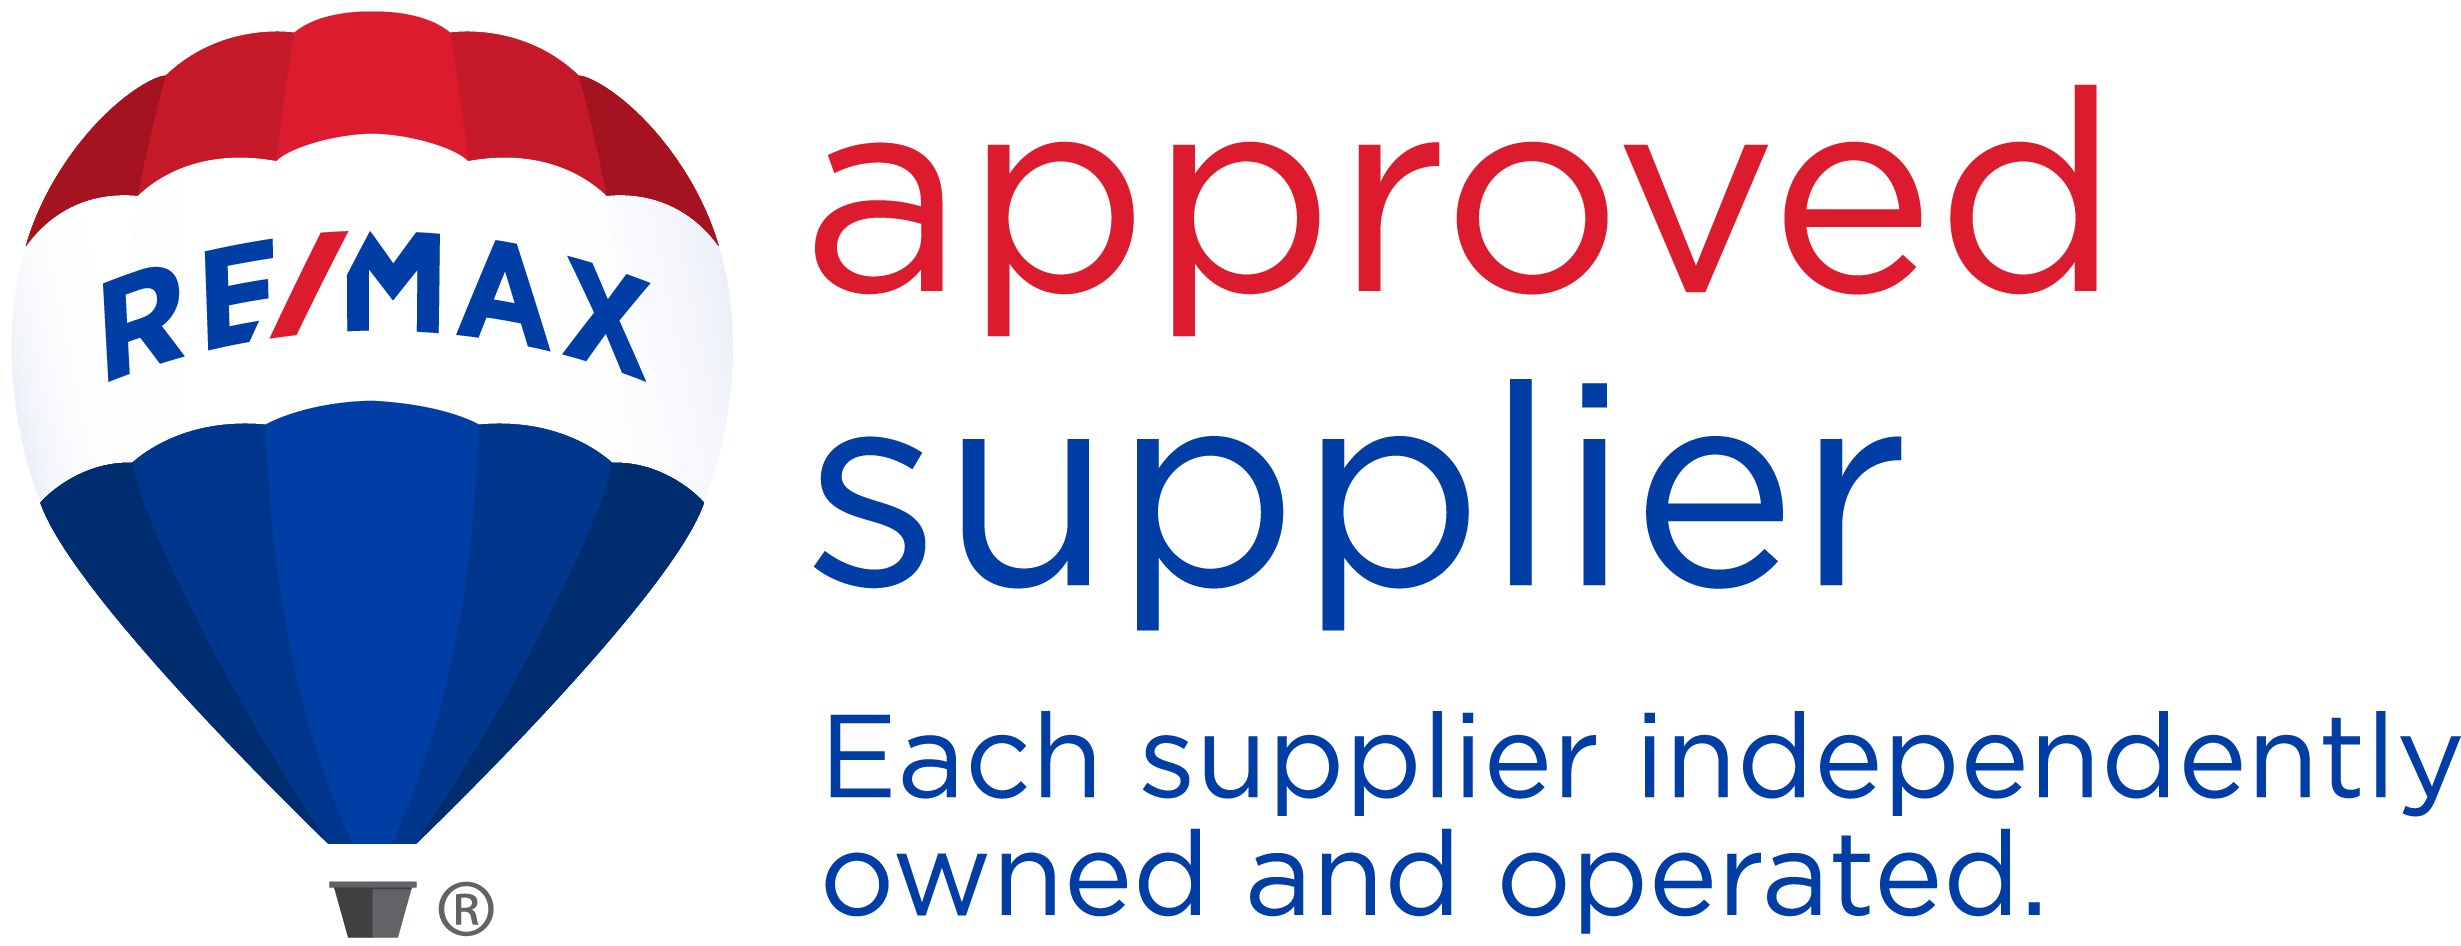 remax business cards approved supplier 1